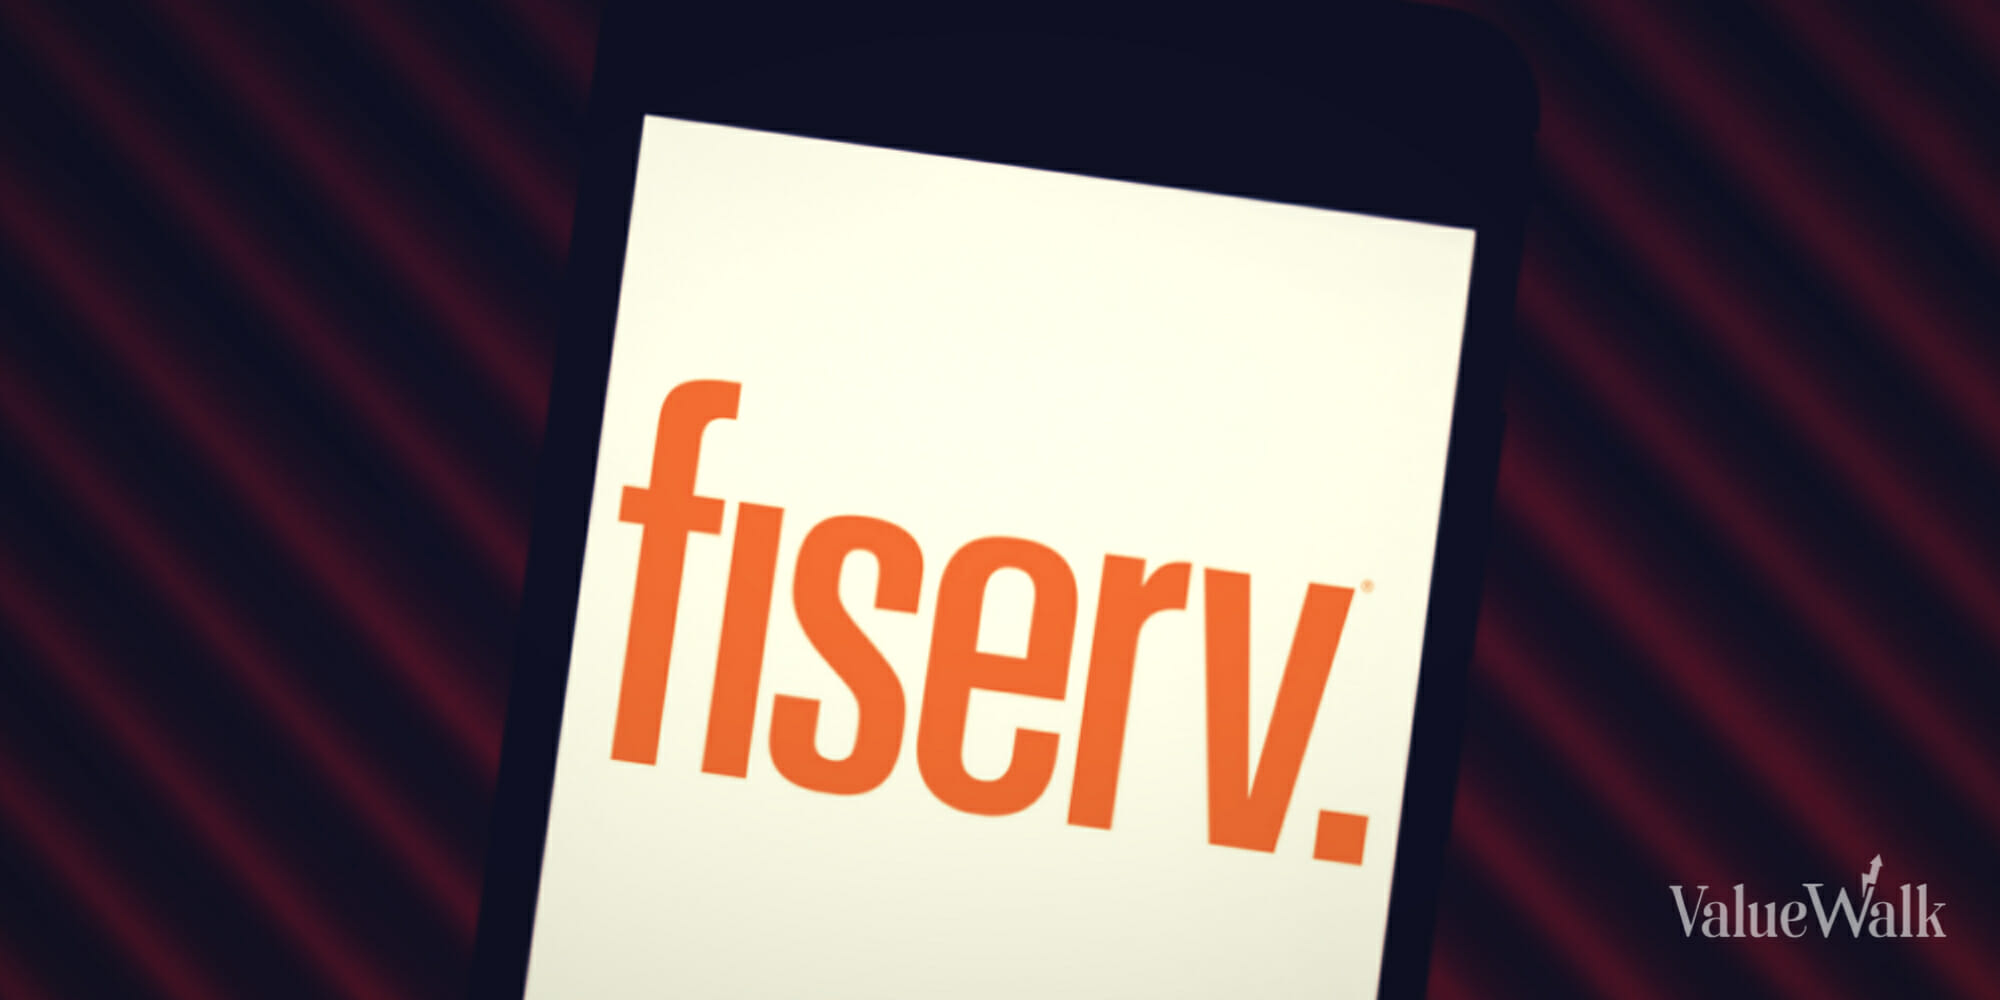 Could A Potential Bank Charter Lift Fiserv?